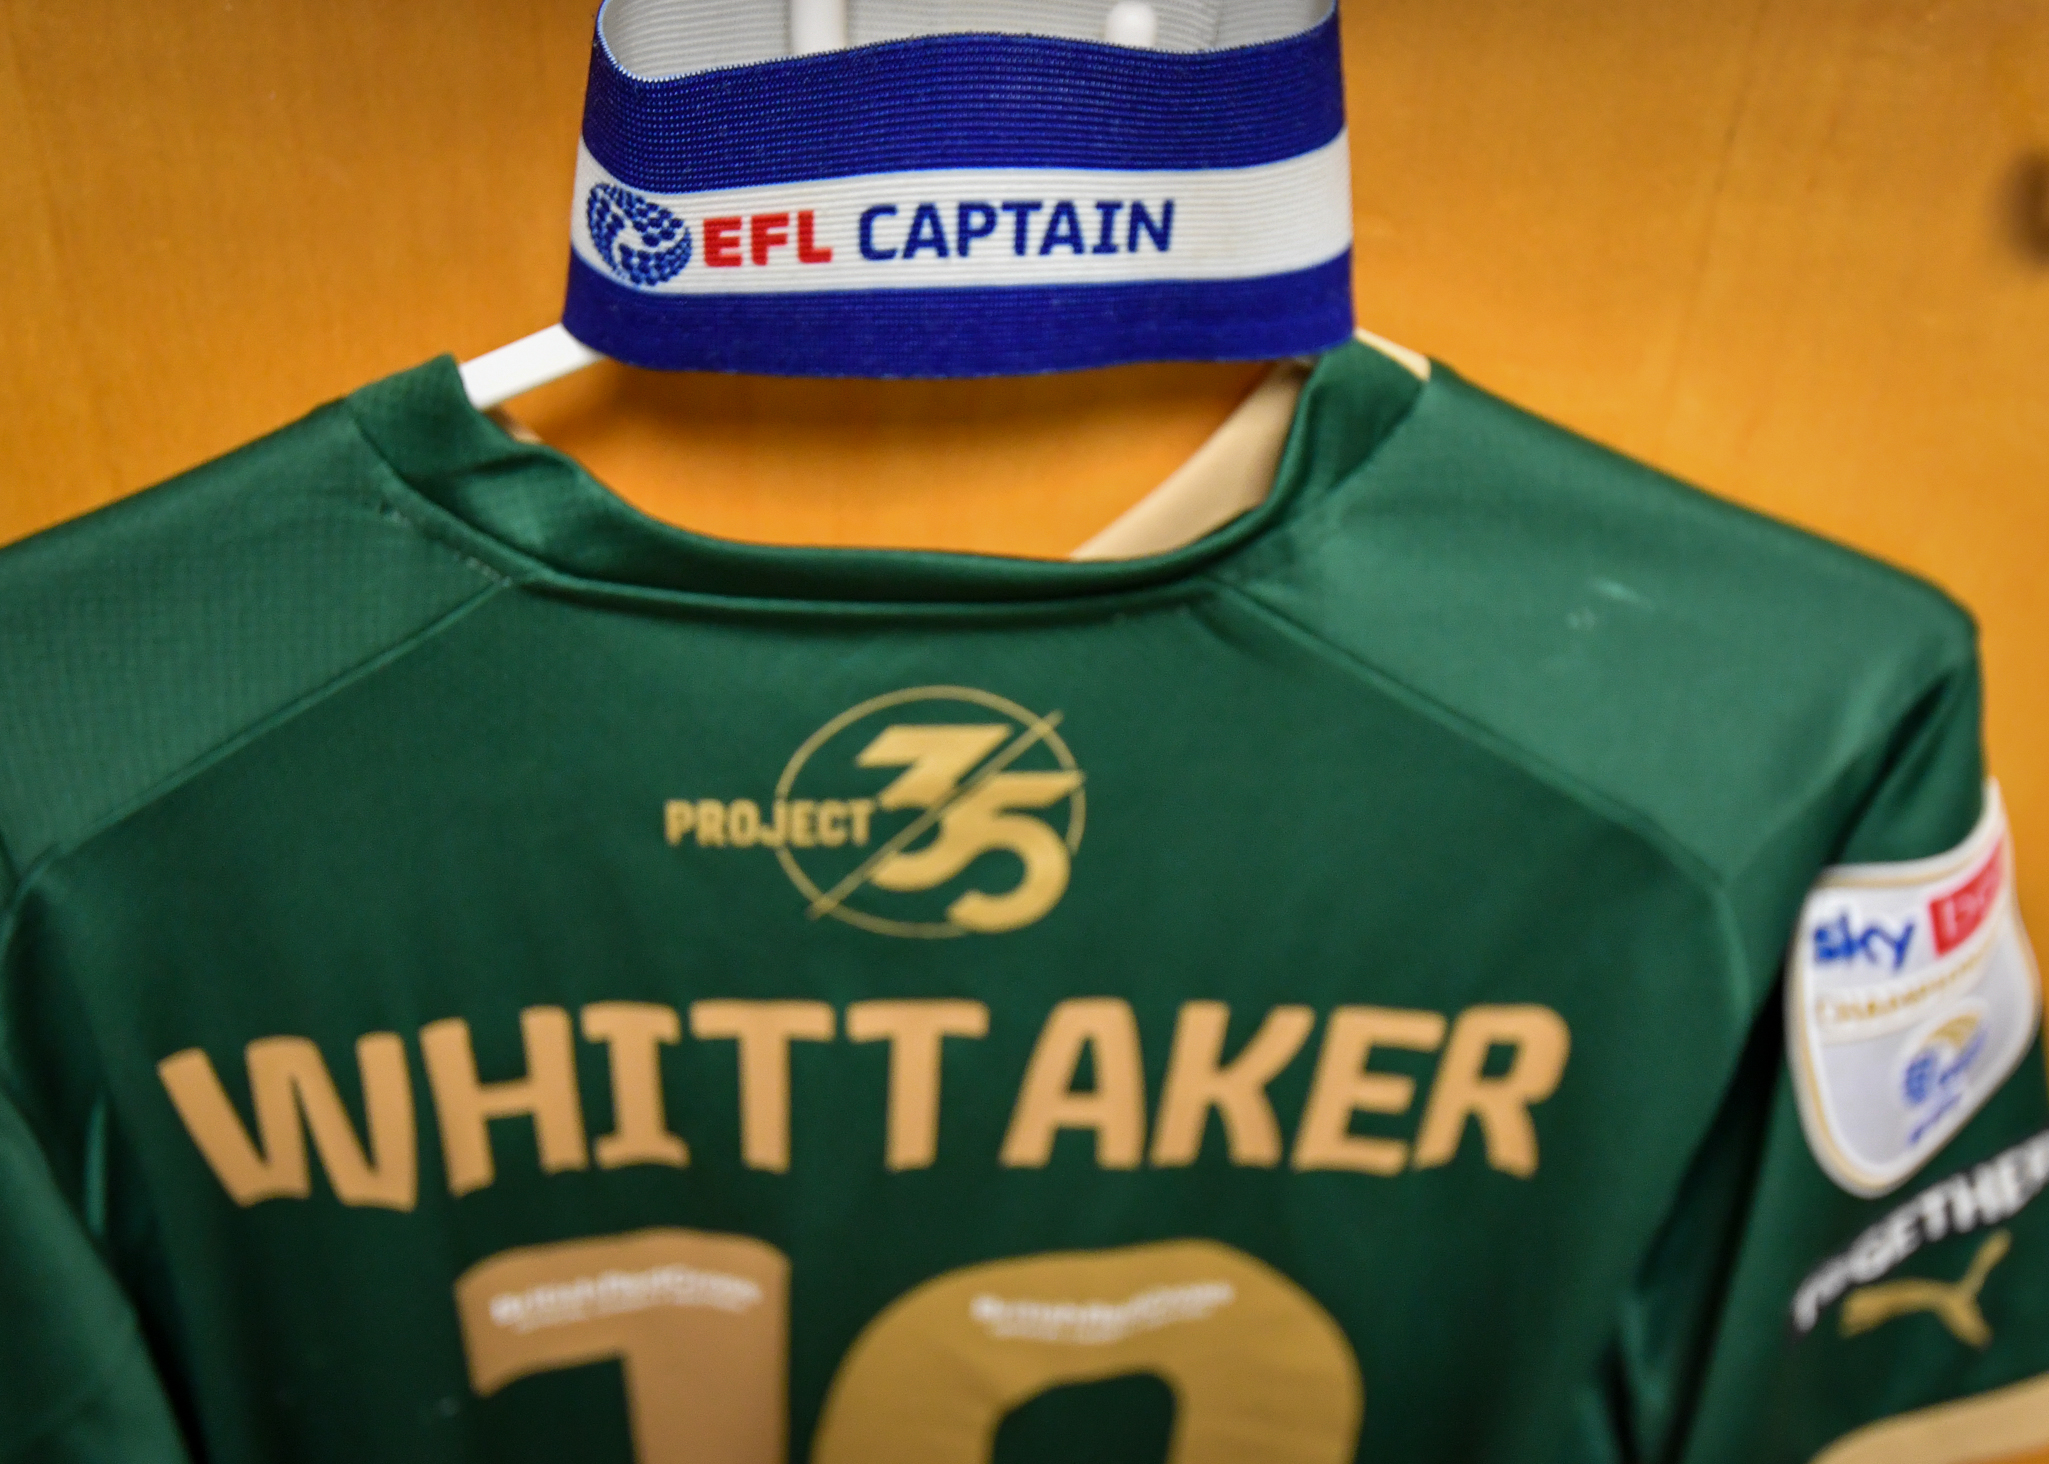 Whittaker's shirt hanging in the dressing room with the Captain's armband